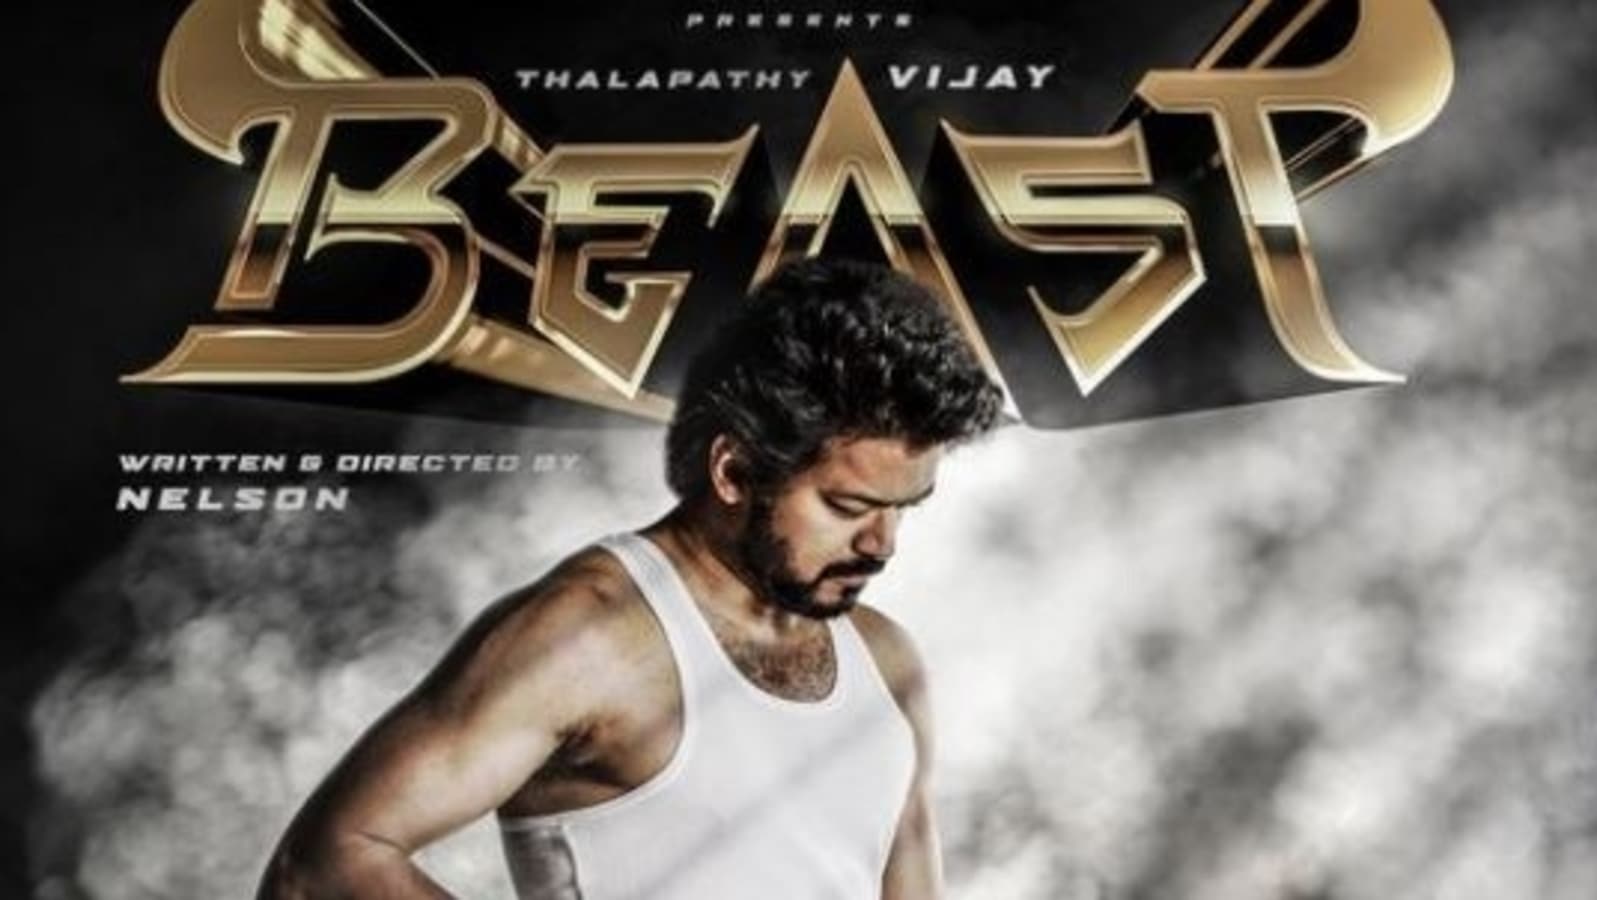 Vijay’s new Tamil film titled Beast, firstlook poster unveiled on the